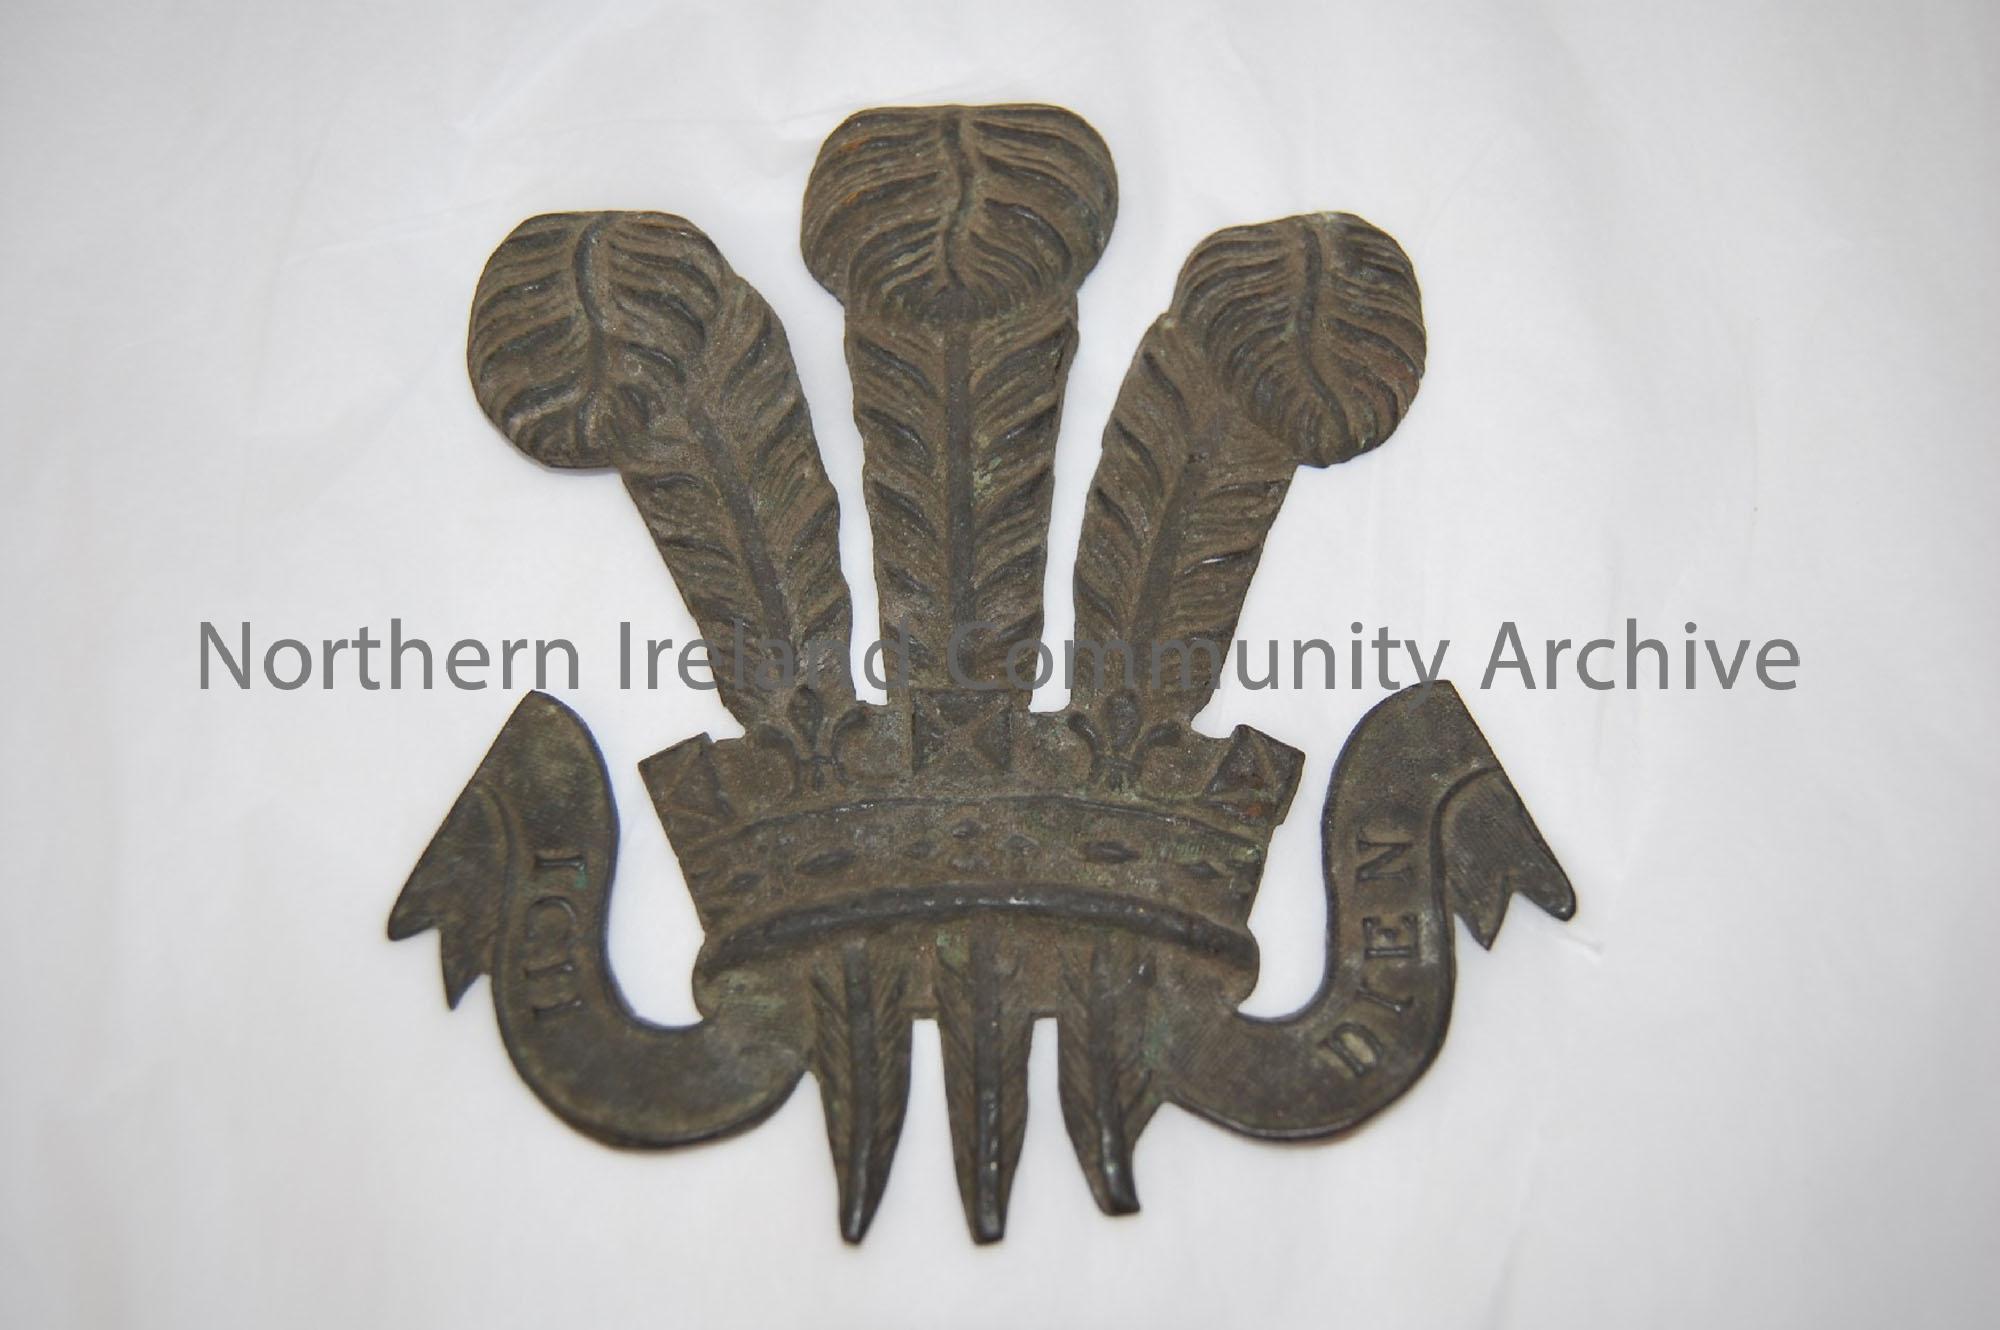 Possibly a military crest, three feathers coming out of a crown over a scroll with “Ich Dien” motto.